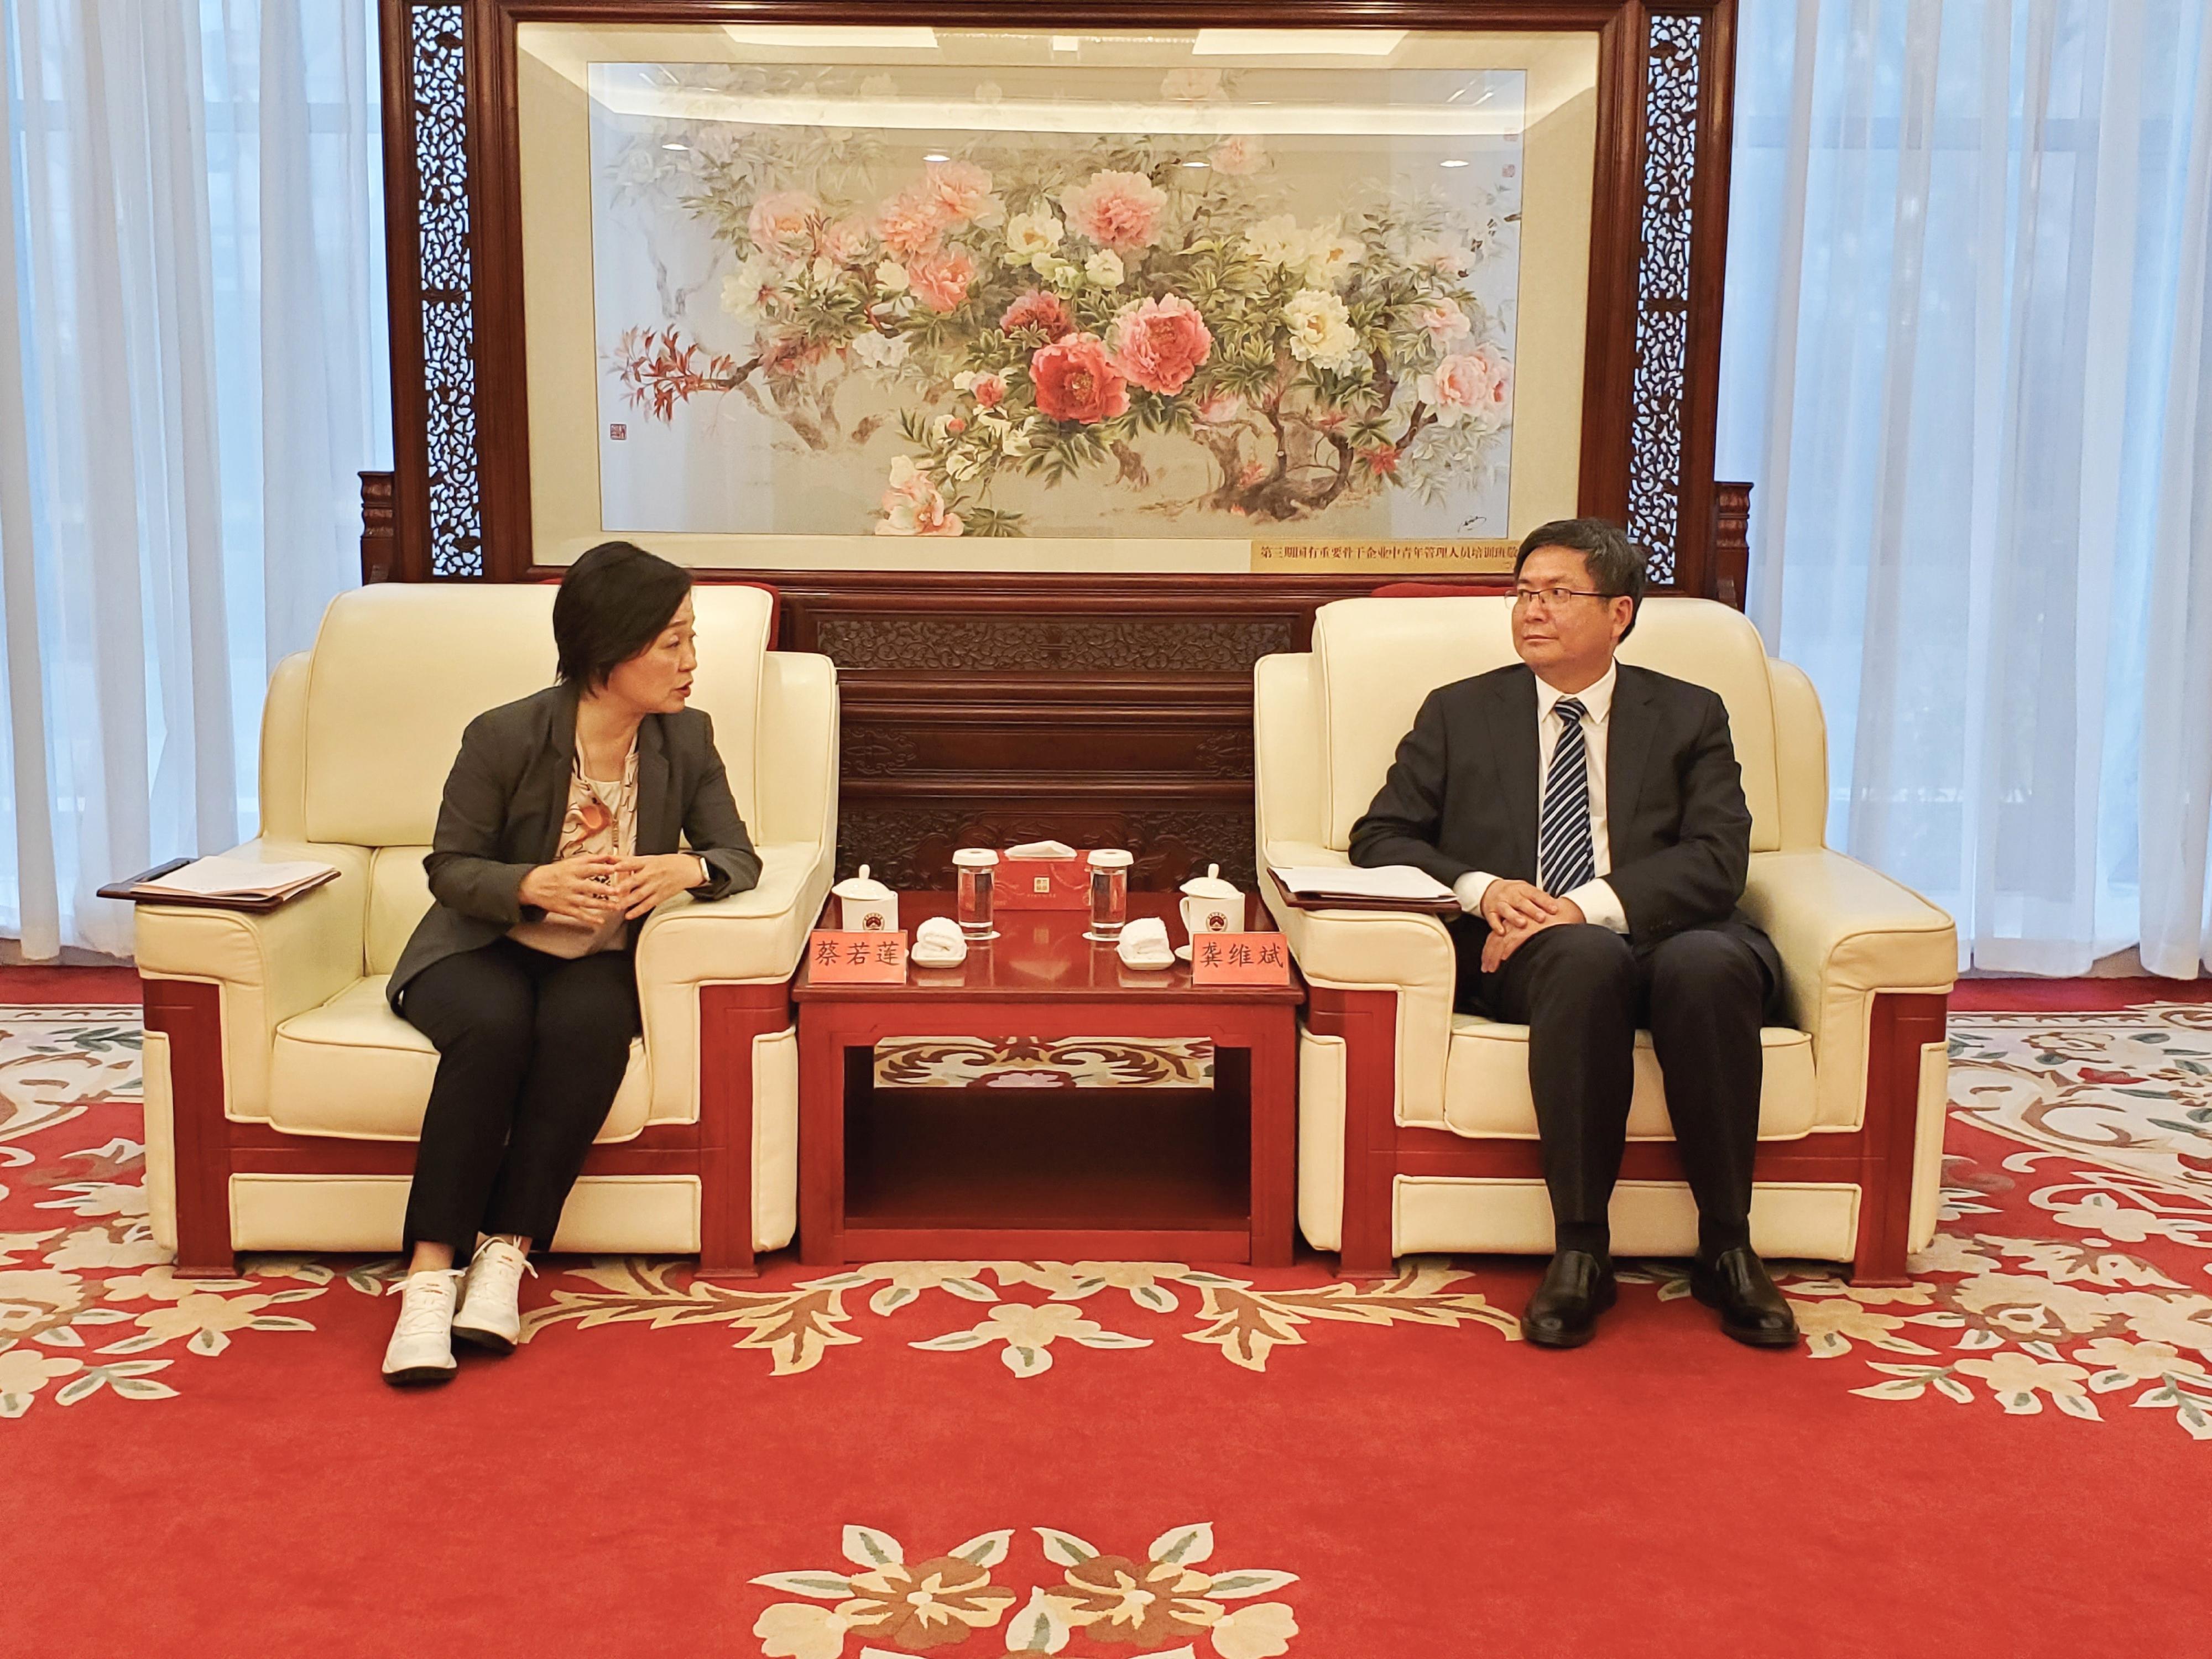 The Secretary for Education, Dr Choi Yuk-lin (left), visits the National Academy of Governance and meets its Vice President Mr Gong Weibin (right) in Beijing yesterday (May 15).